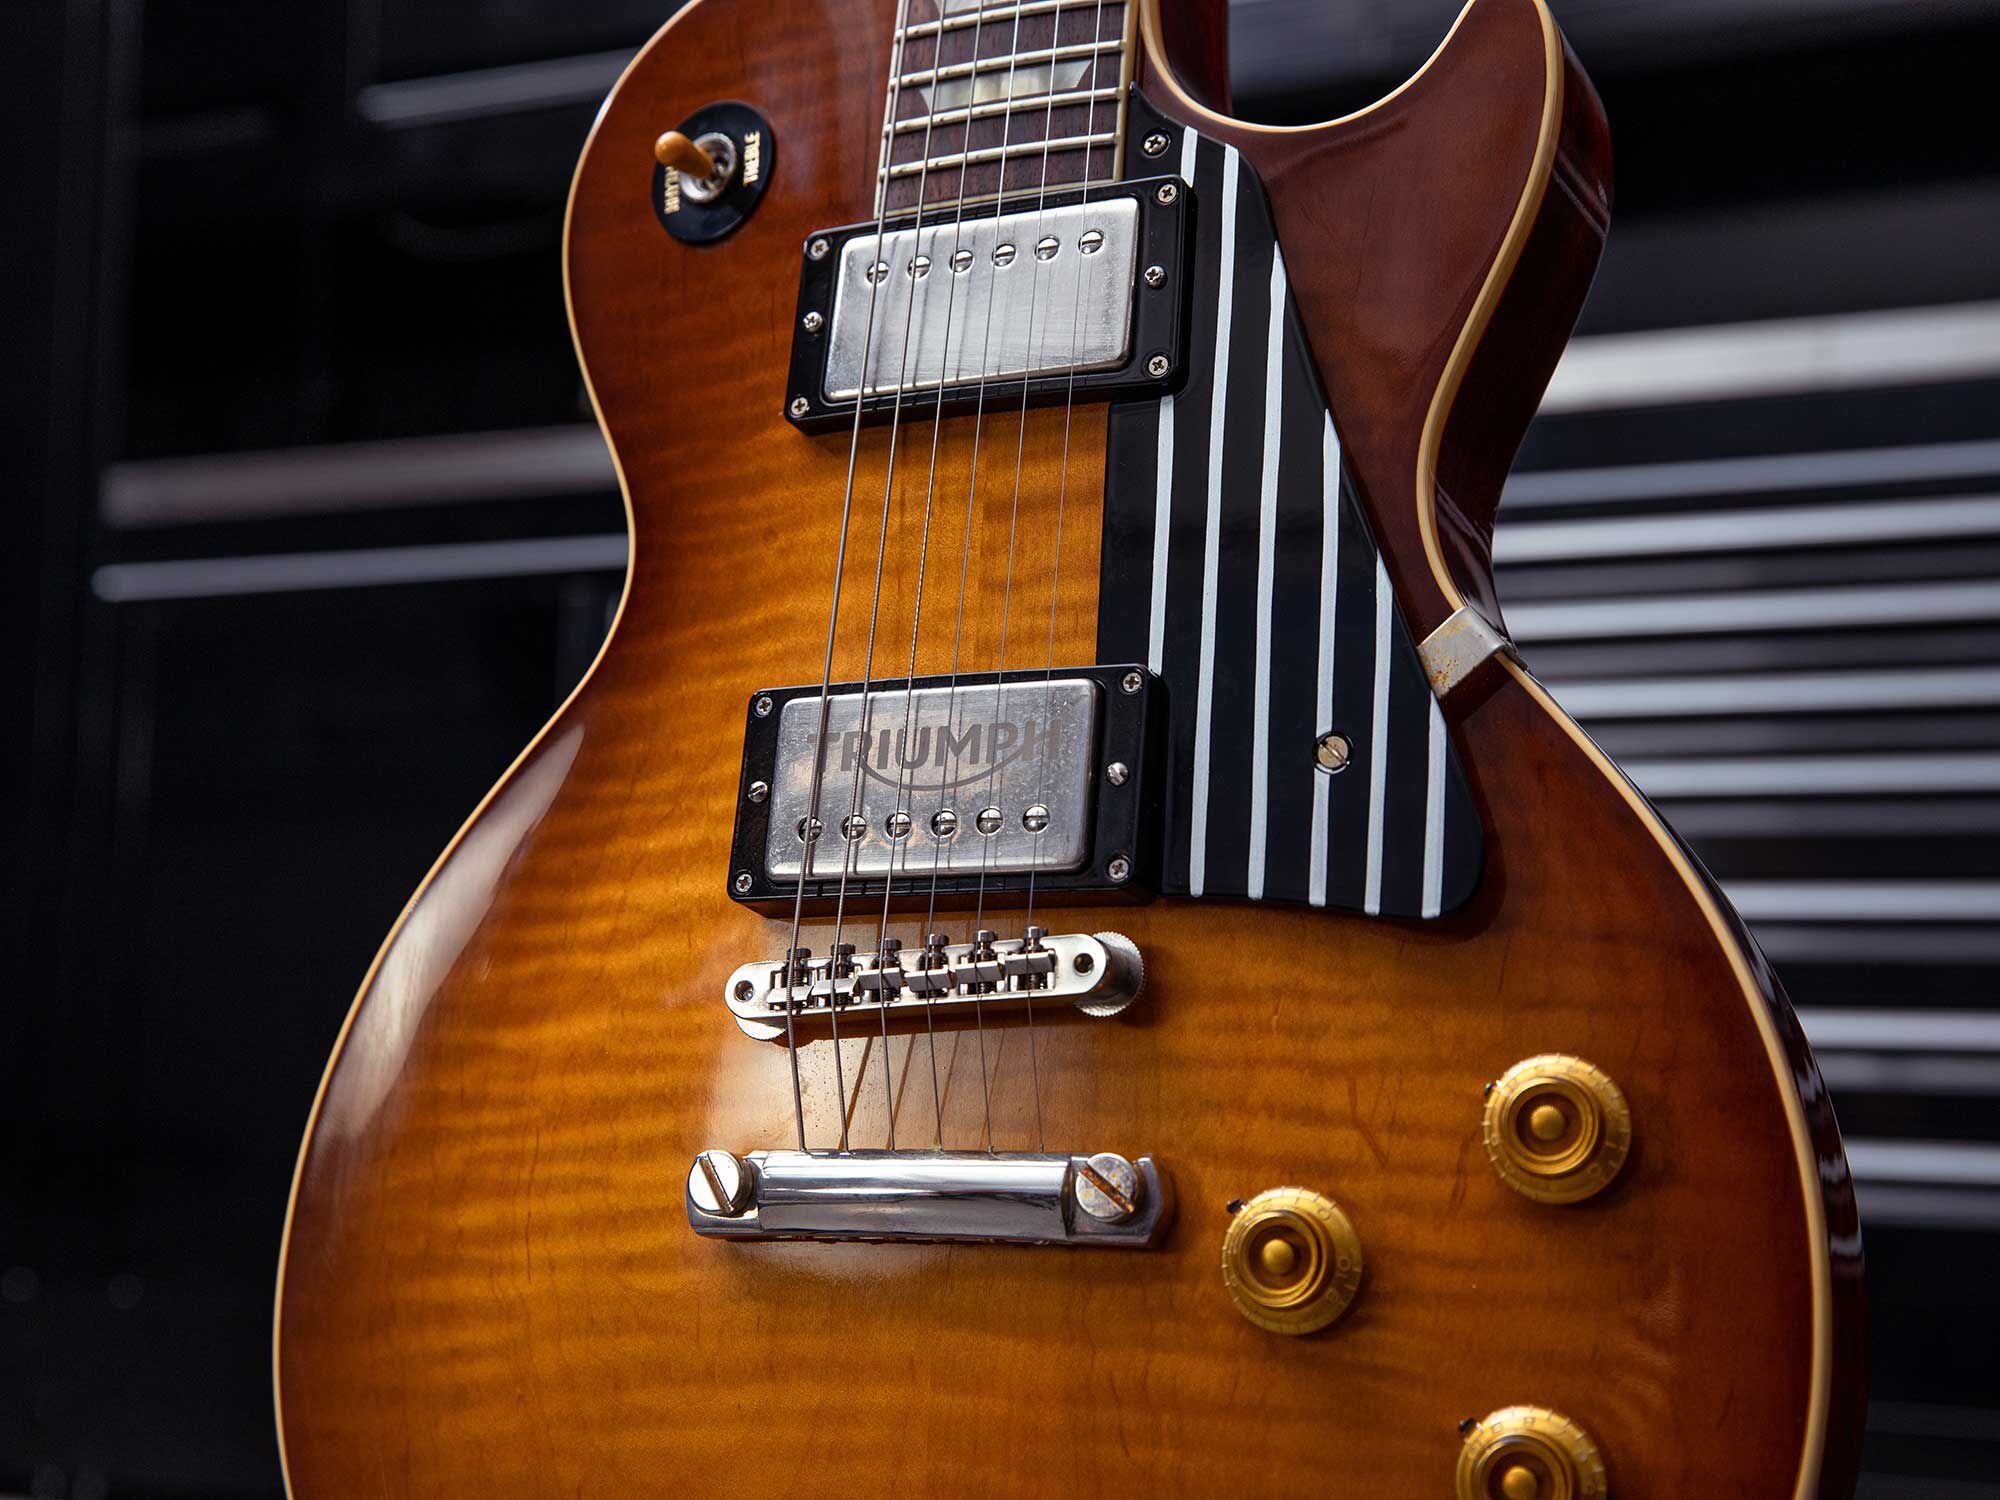 The Les Paul’s pickguard’s design is inspired by the Bonneville’s legendary engine fins.